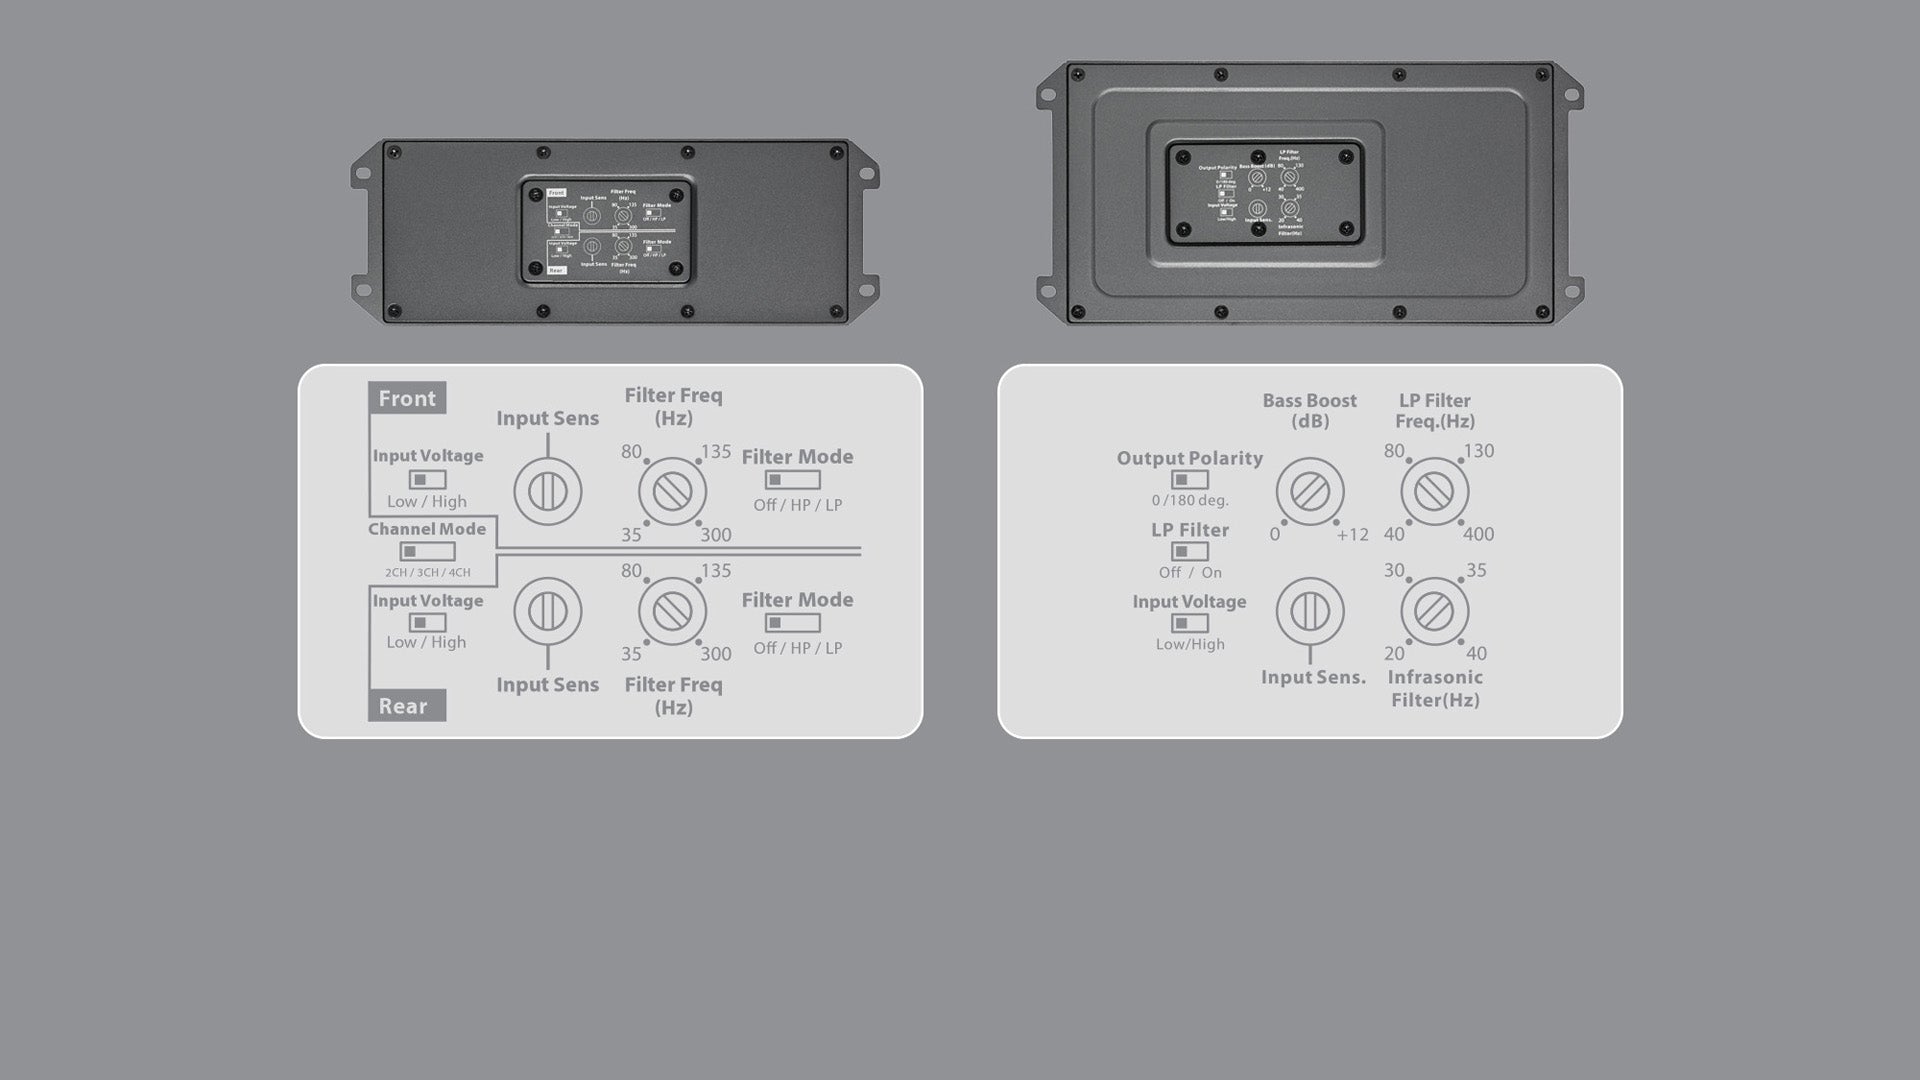 An image displaying controls for two different MX amplifiers.